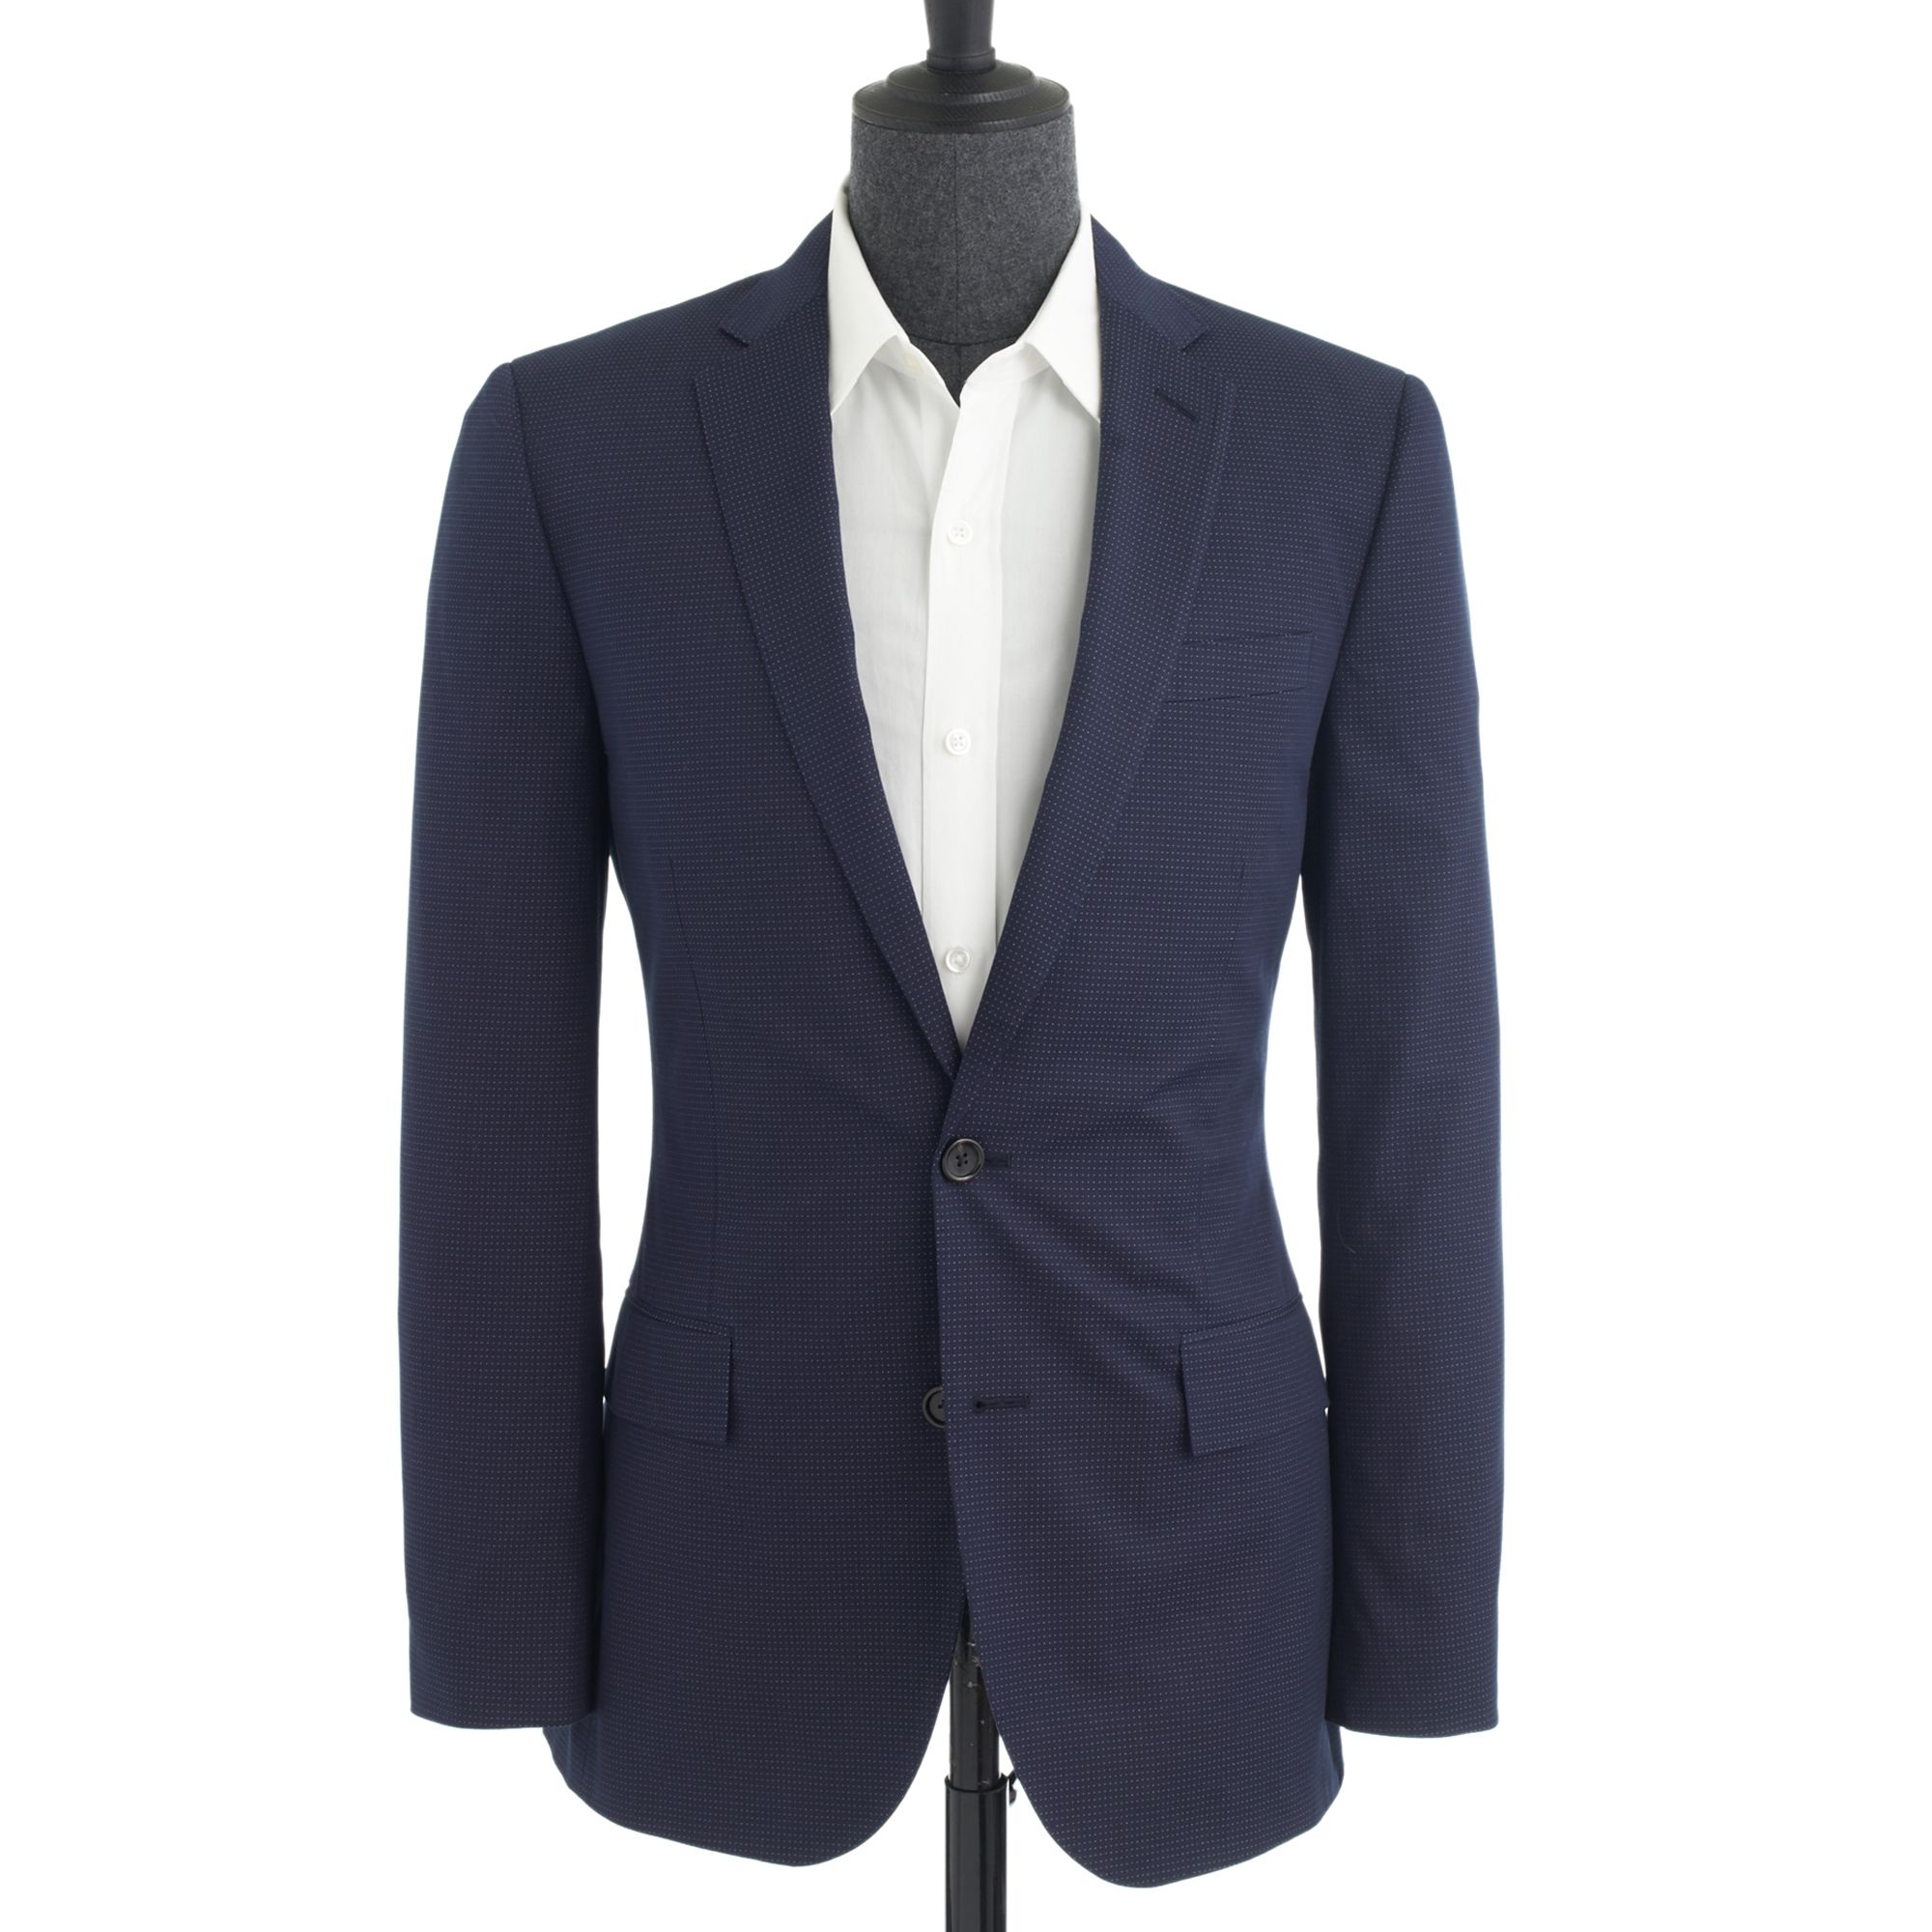 J.crew Ludlow Suit Jacket in Dotted Indigo Italian Cotton in Blue for ...